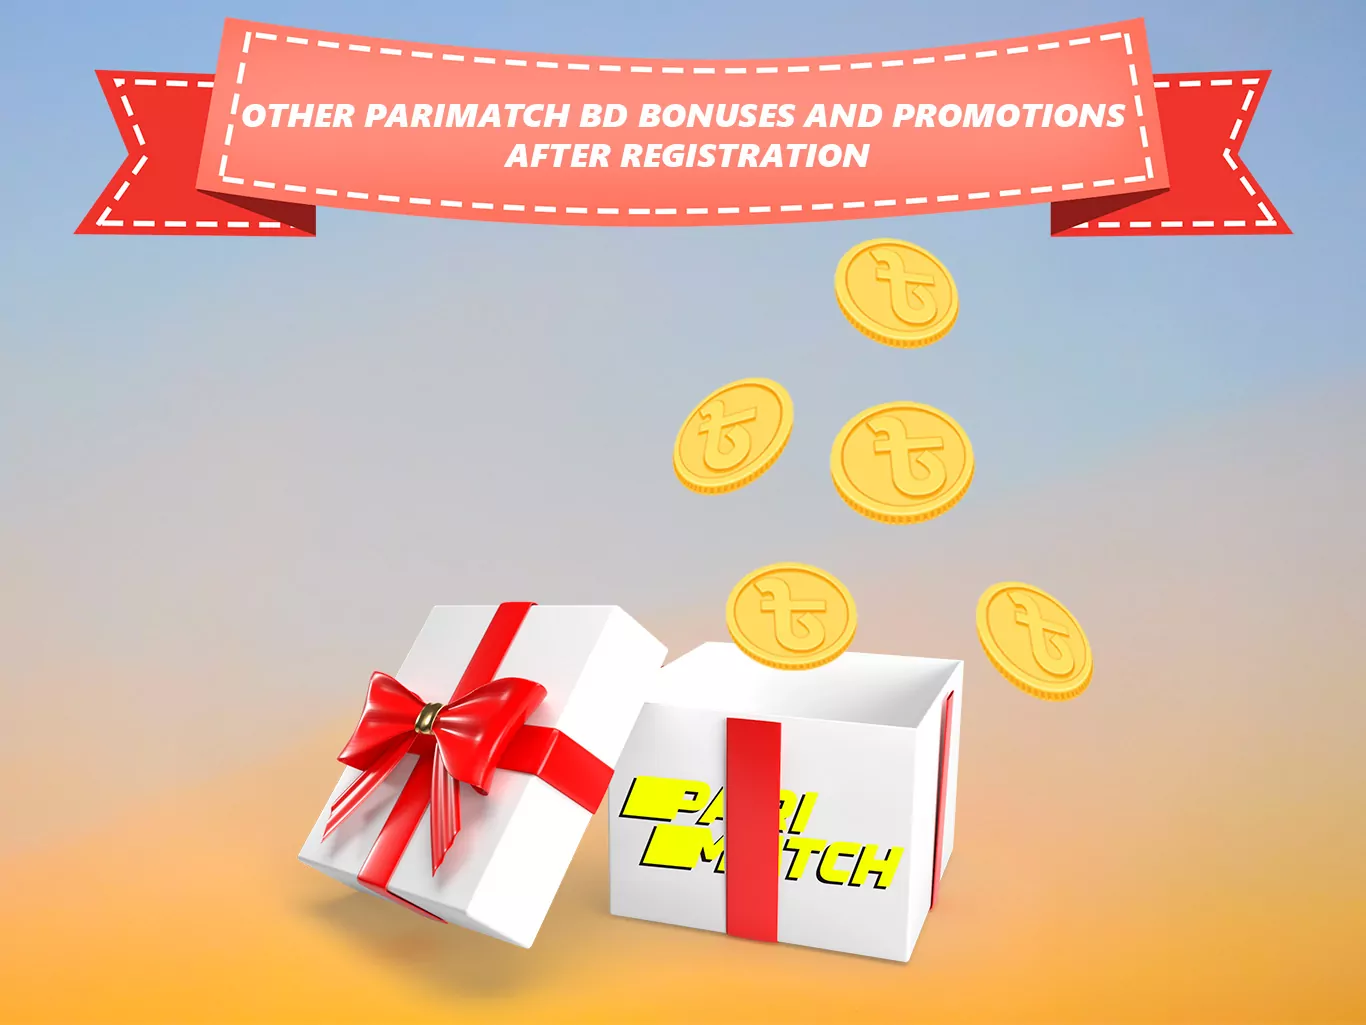 Parimatch gives bonuses not only for registration, there are many other interesting bonuses and promotions.